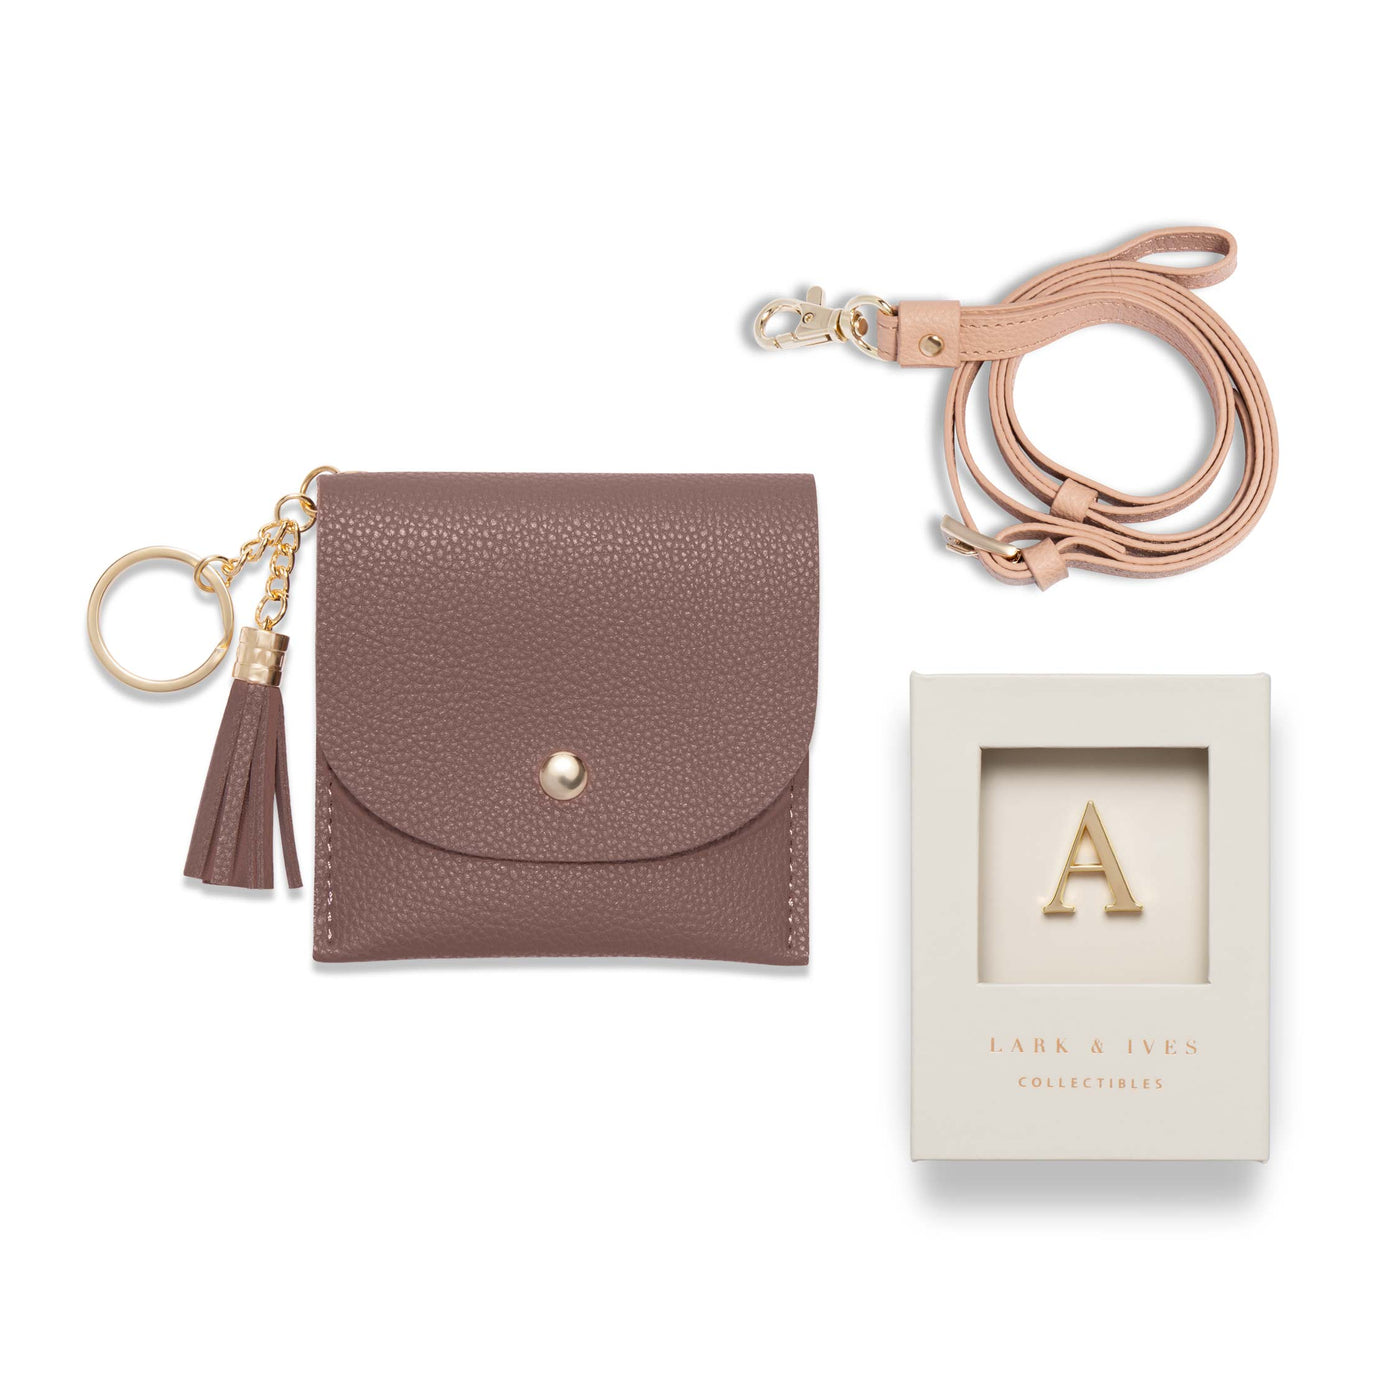 Lark and Ives / Vegan Leather Accessories / Small Accessories / Wallet / Mini Wallet / Card Case / Card Holder / Button snap closure / Flap Wallet / Card Purse with Gold Button and Keyring / Lanyard / Card Purse with Lanyard and Monogram Pin / Mauve